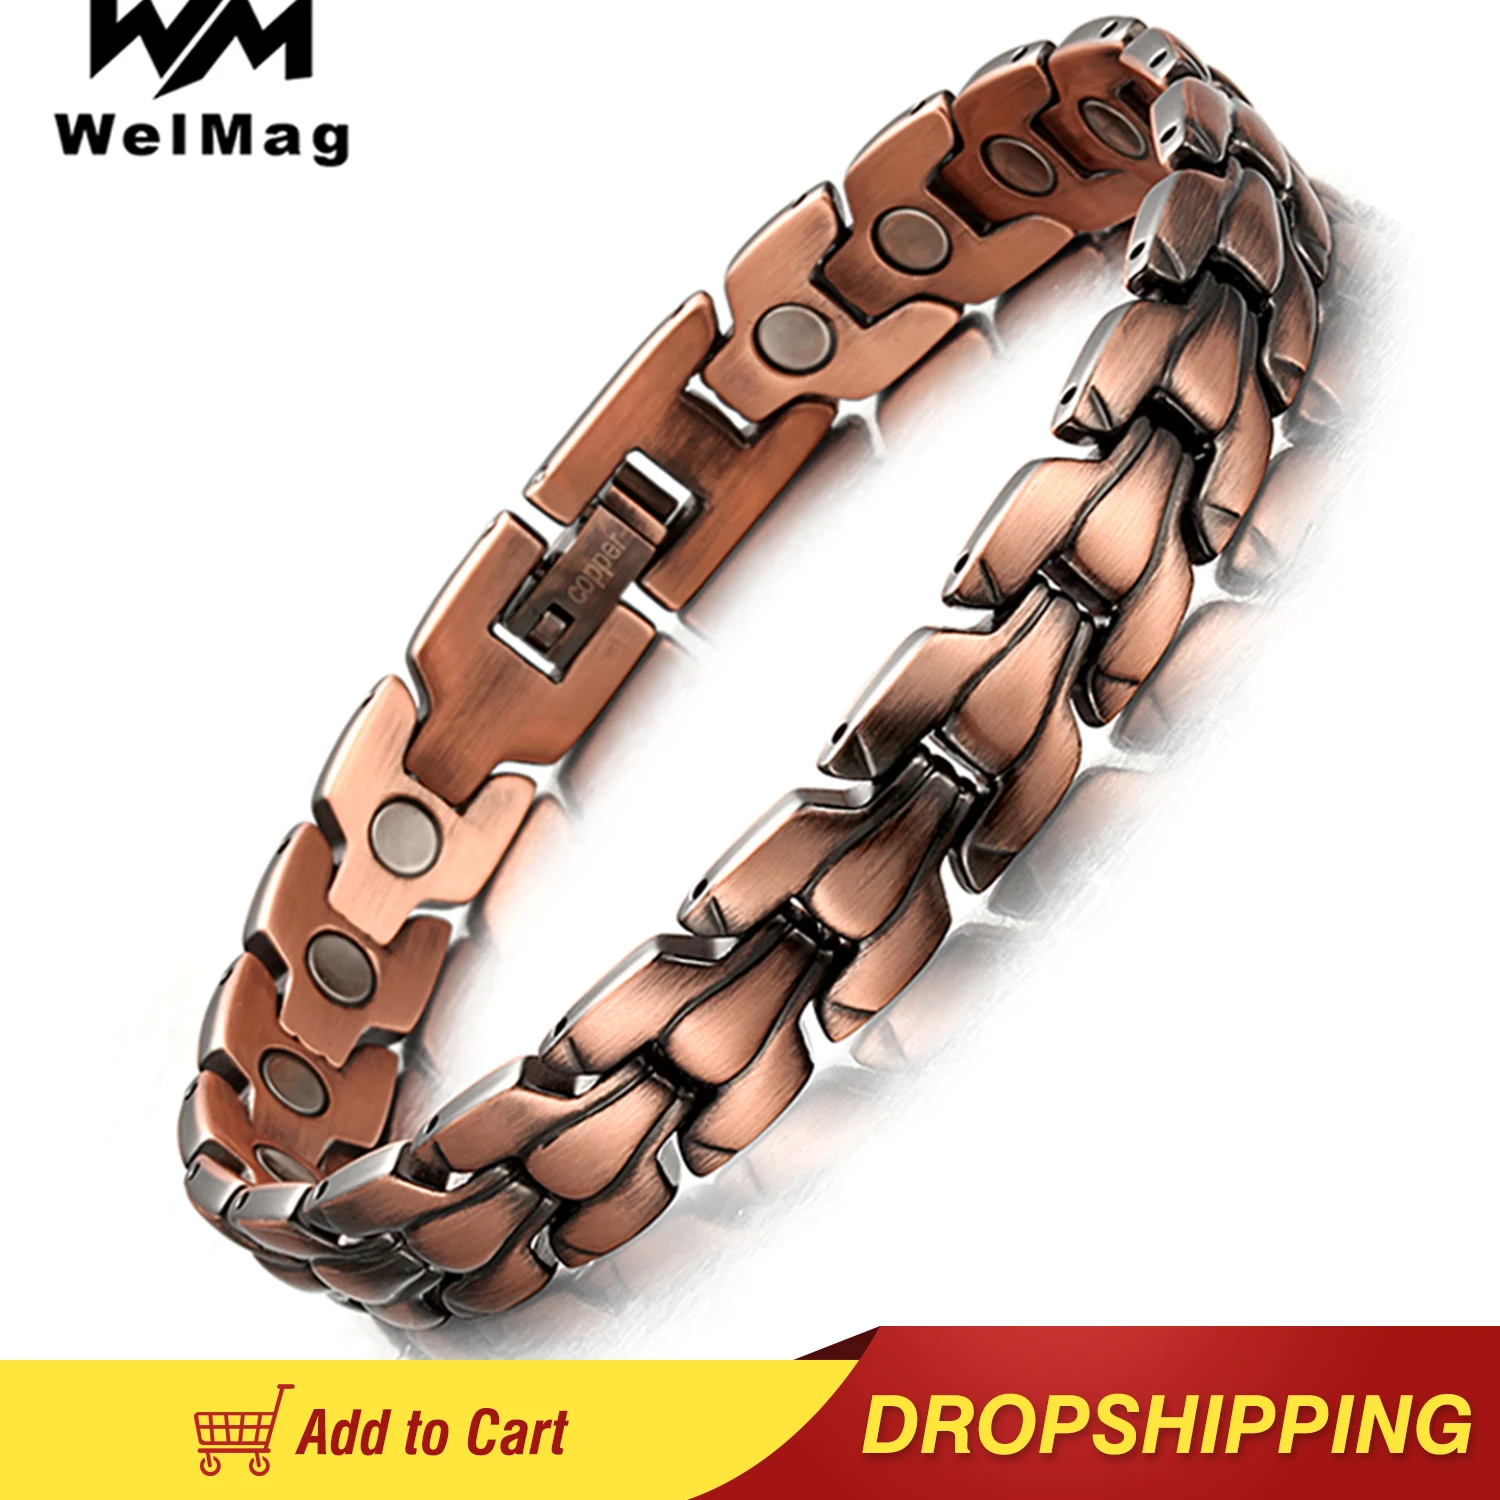 

WelMag Copper Bracelets For Man With Magnetic Bio Energy Bangles Bracelet Viking Health Care Female Wristbands Girls Jewerly